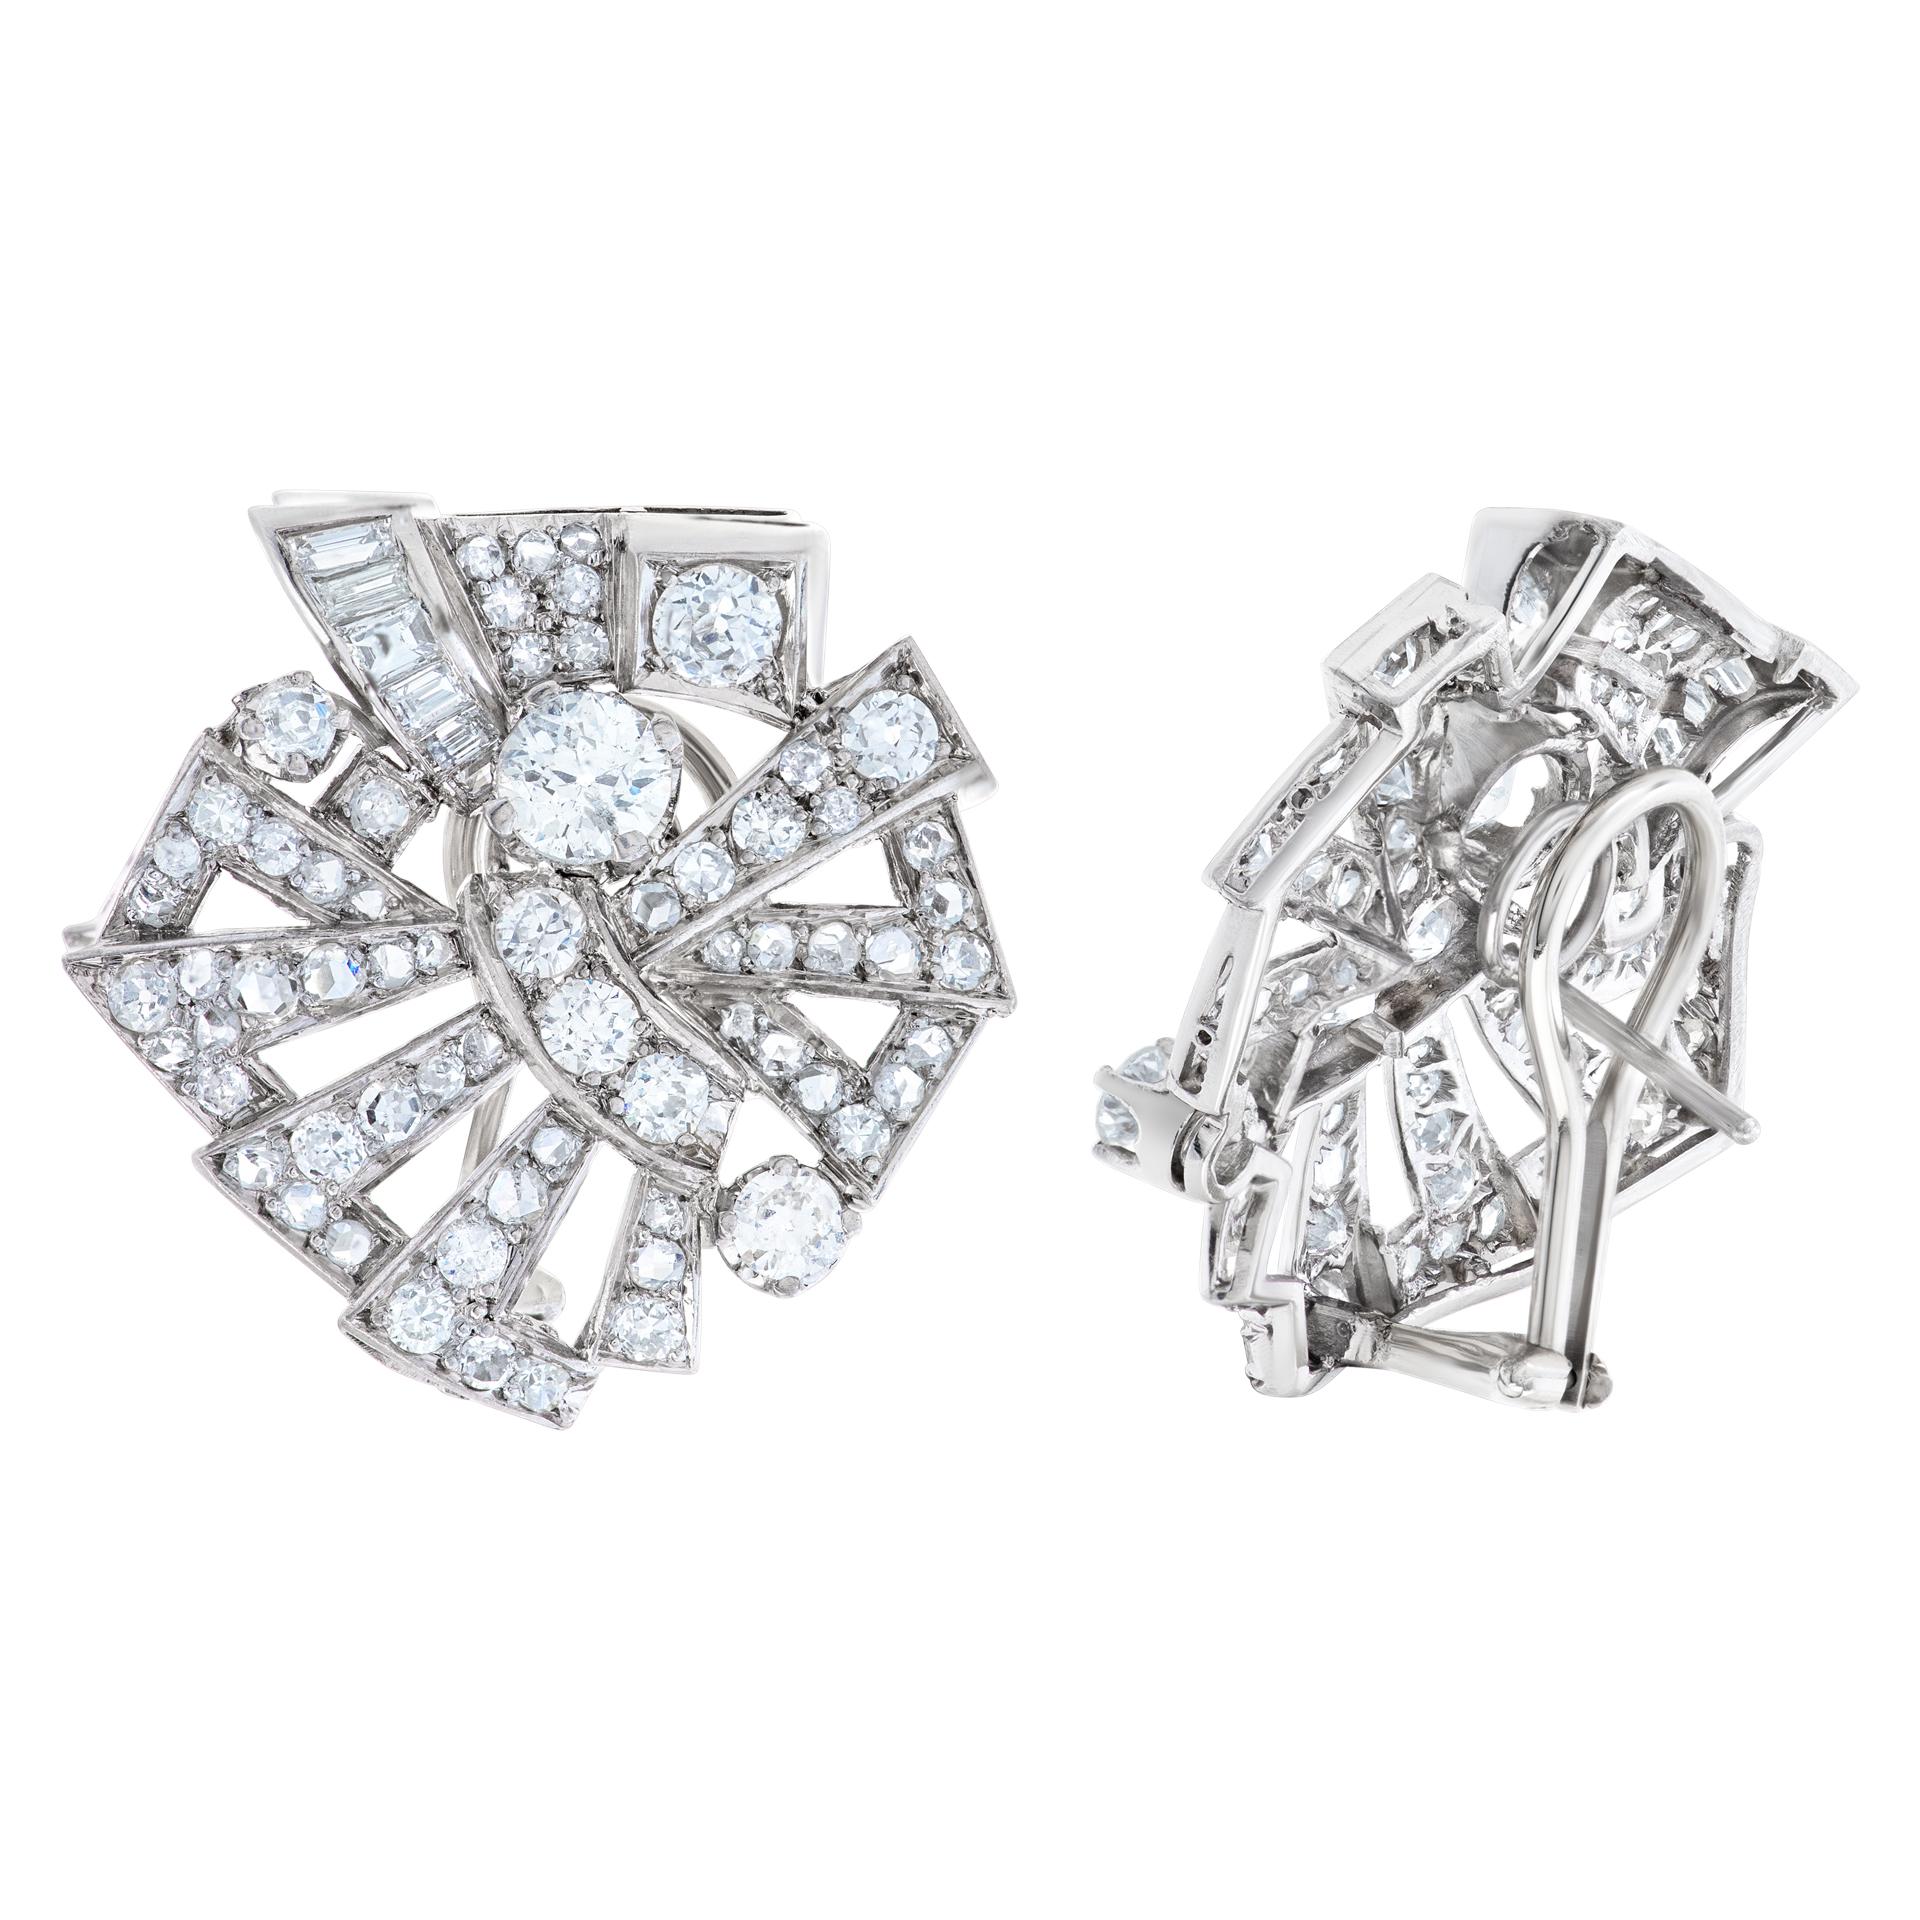 Women's Art Deco Style Earrings With over 5 carats of Diamonds Set In Platinum For Sale